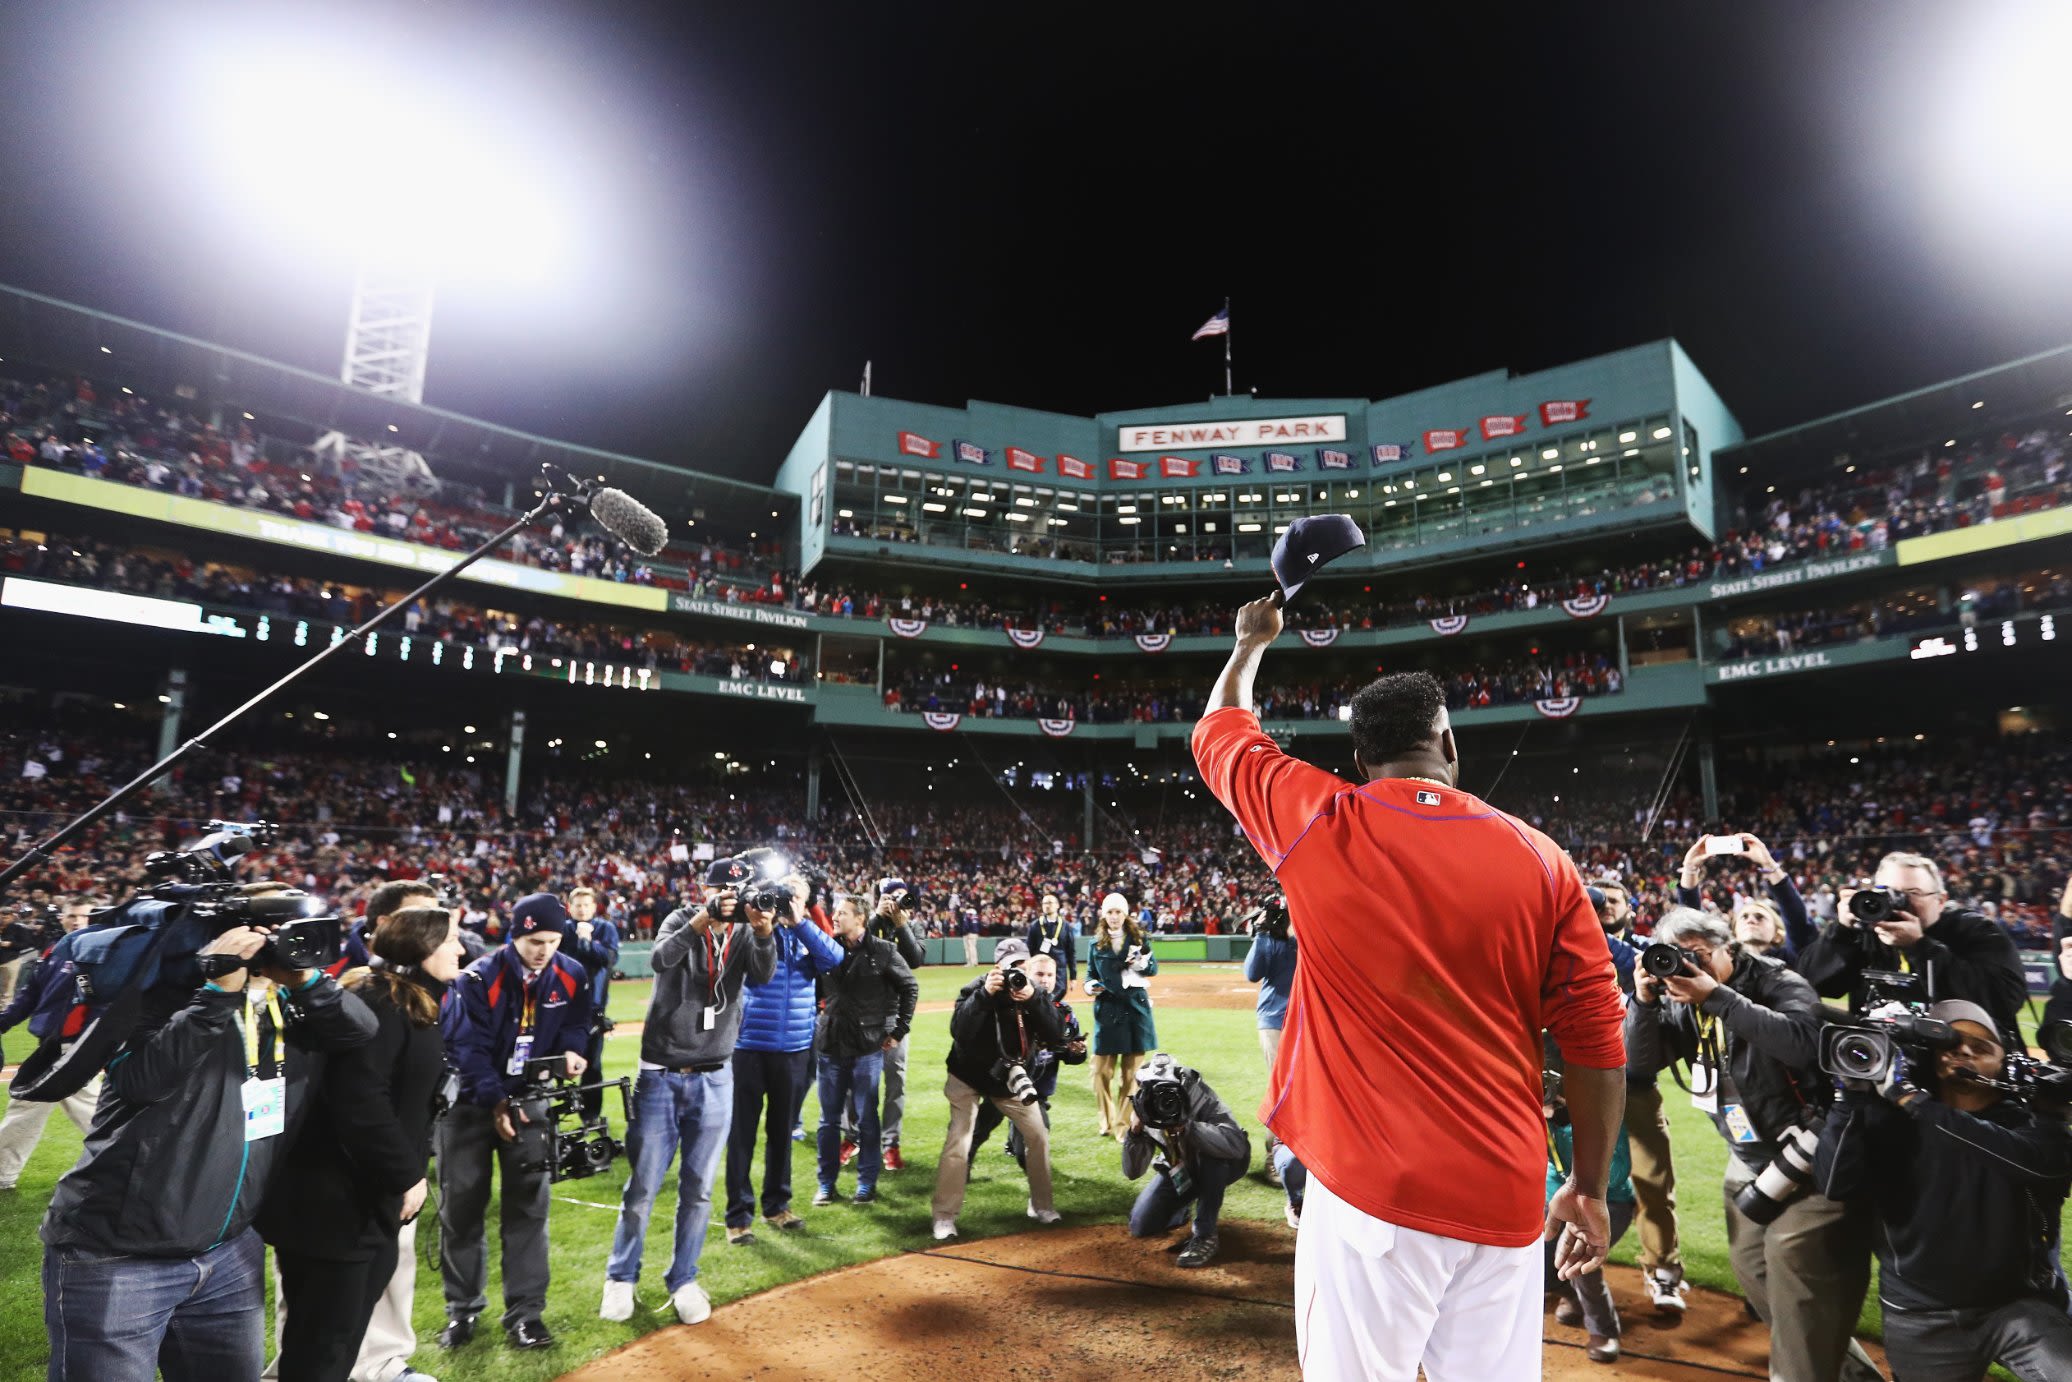 How the Red Sox stadium revamp changed the face of Boston